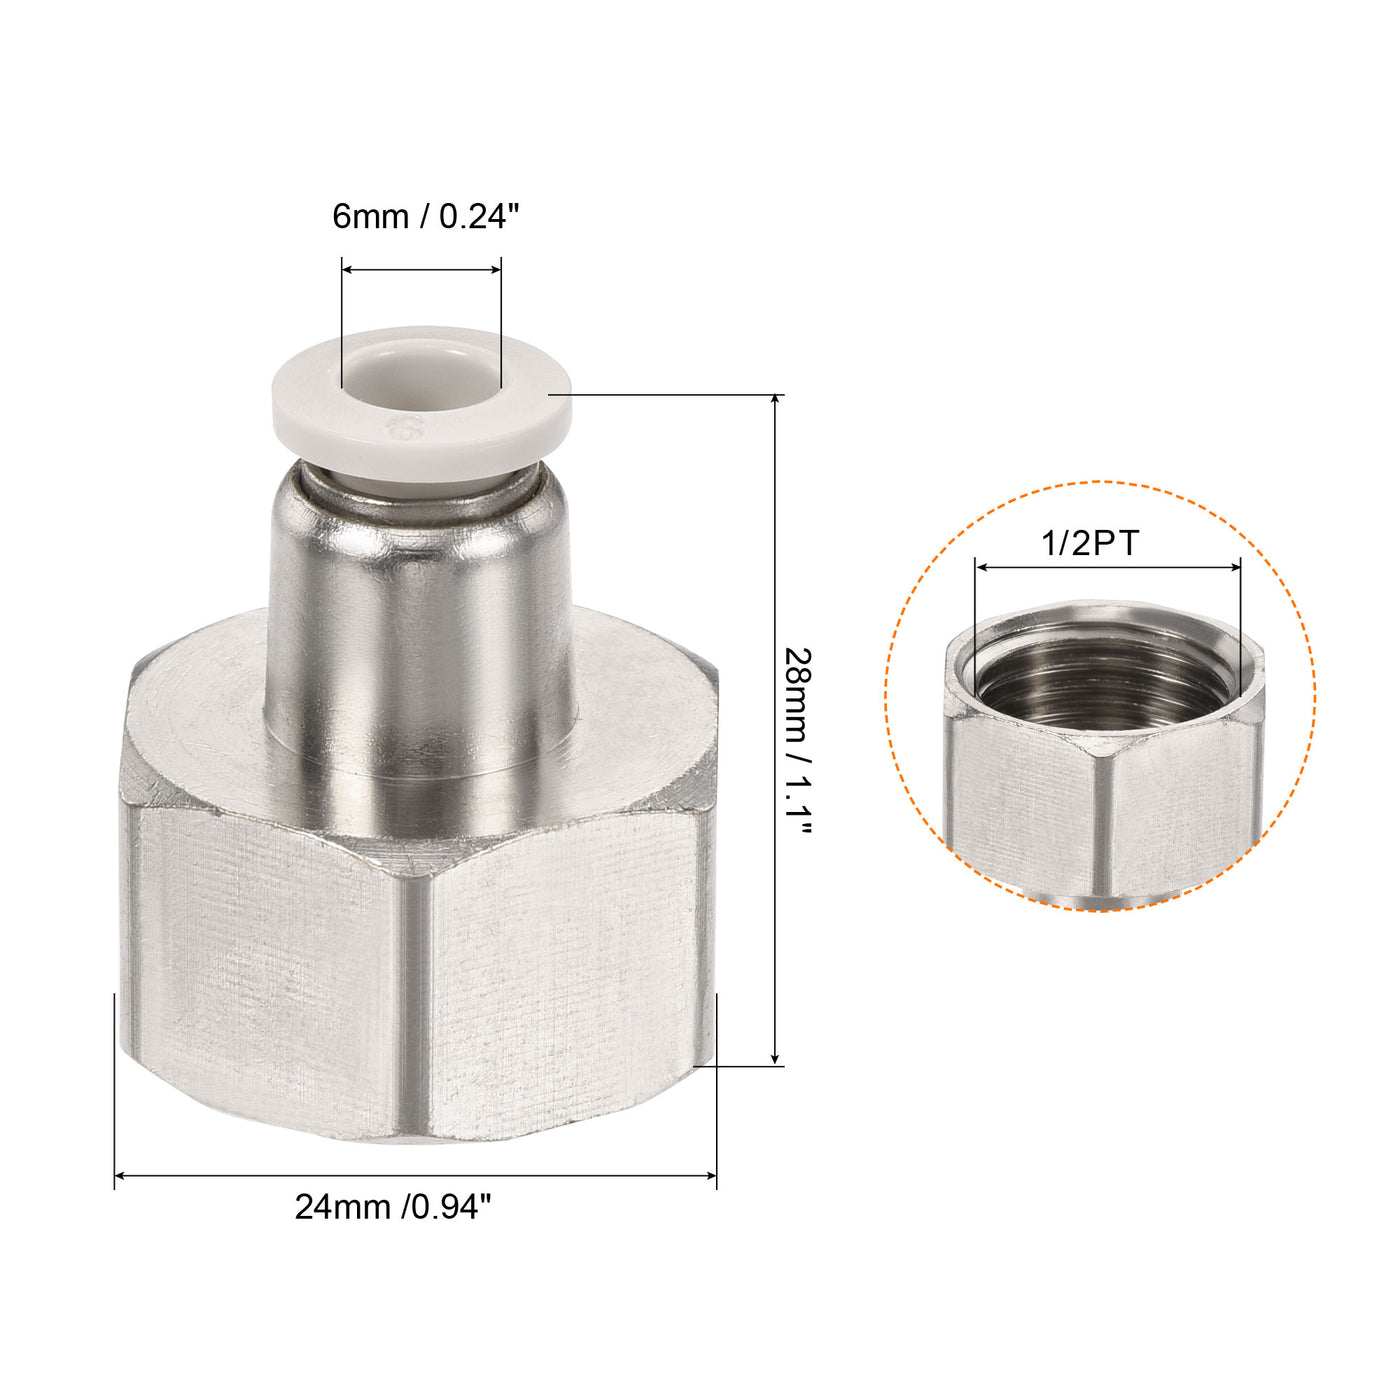 Harfington Push to Connect Fittings 1/2PT Female Thread Fit 6mm Tube OD Nickel-plated Copper Straight Union Fitting, Pack of 2